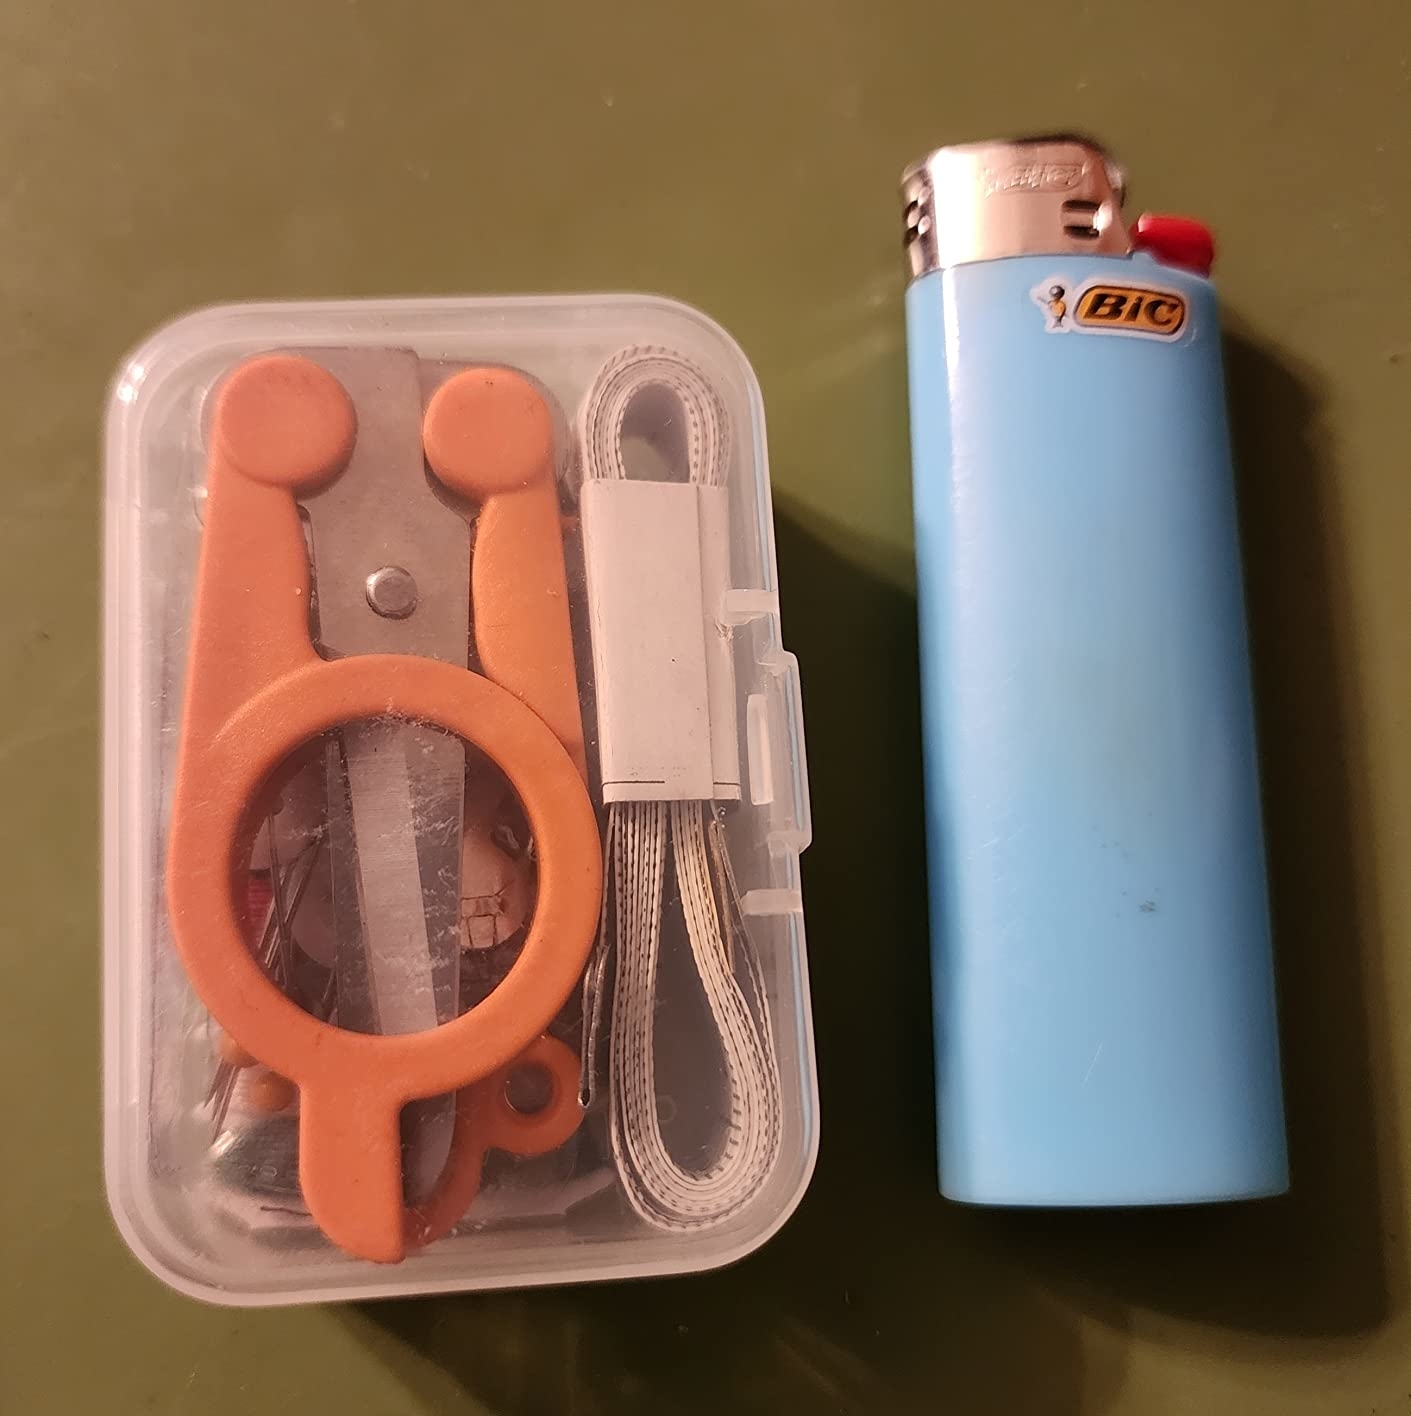 Reviewer&#x27;s photo of the sewing kit next to a Bic lighter for scale